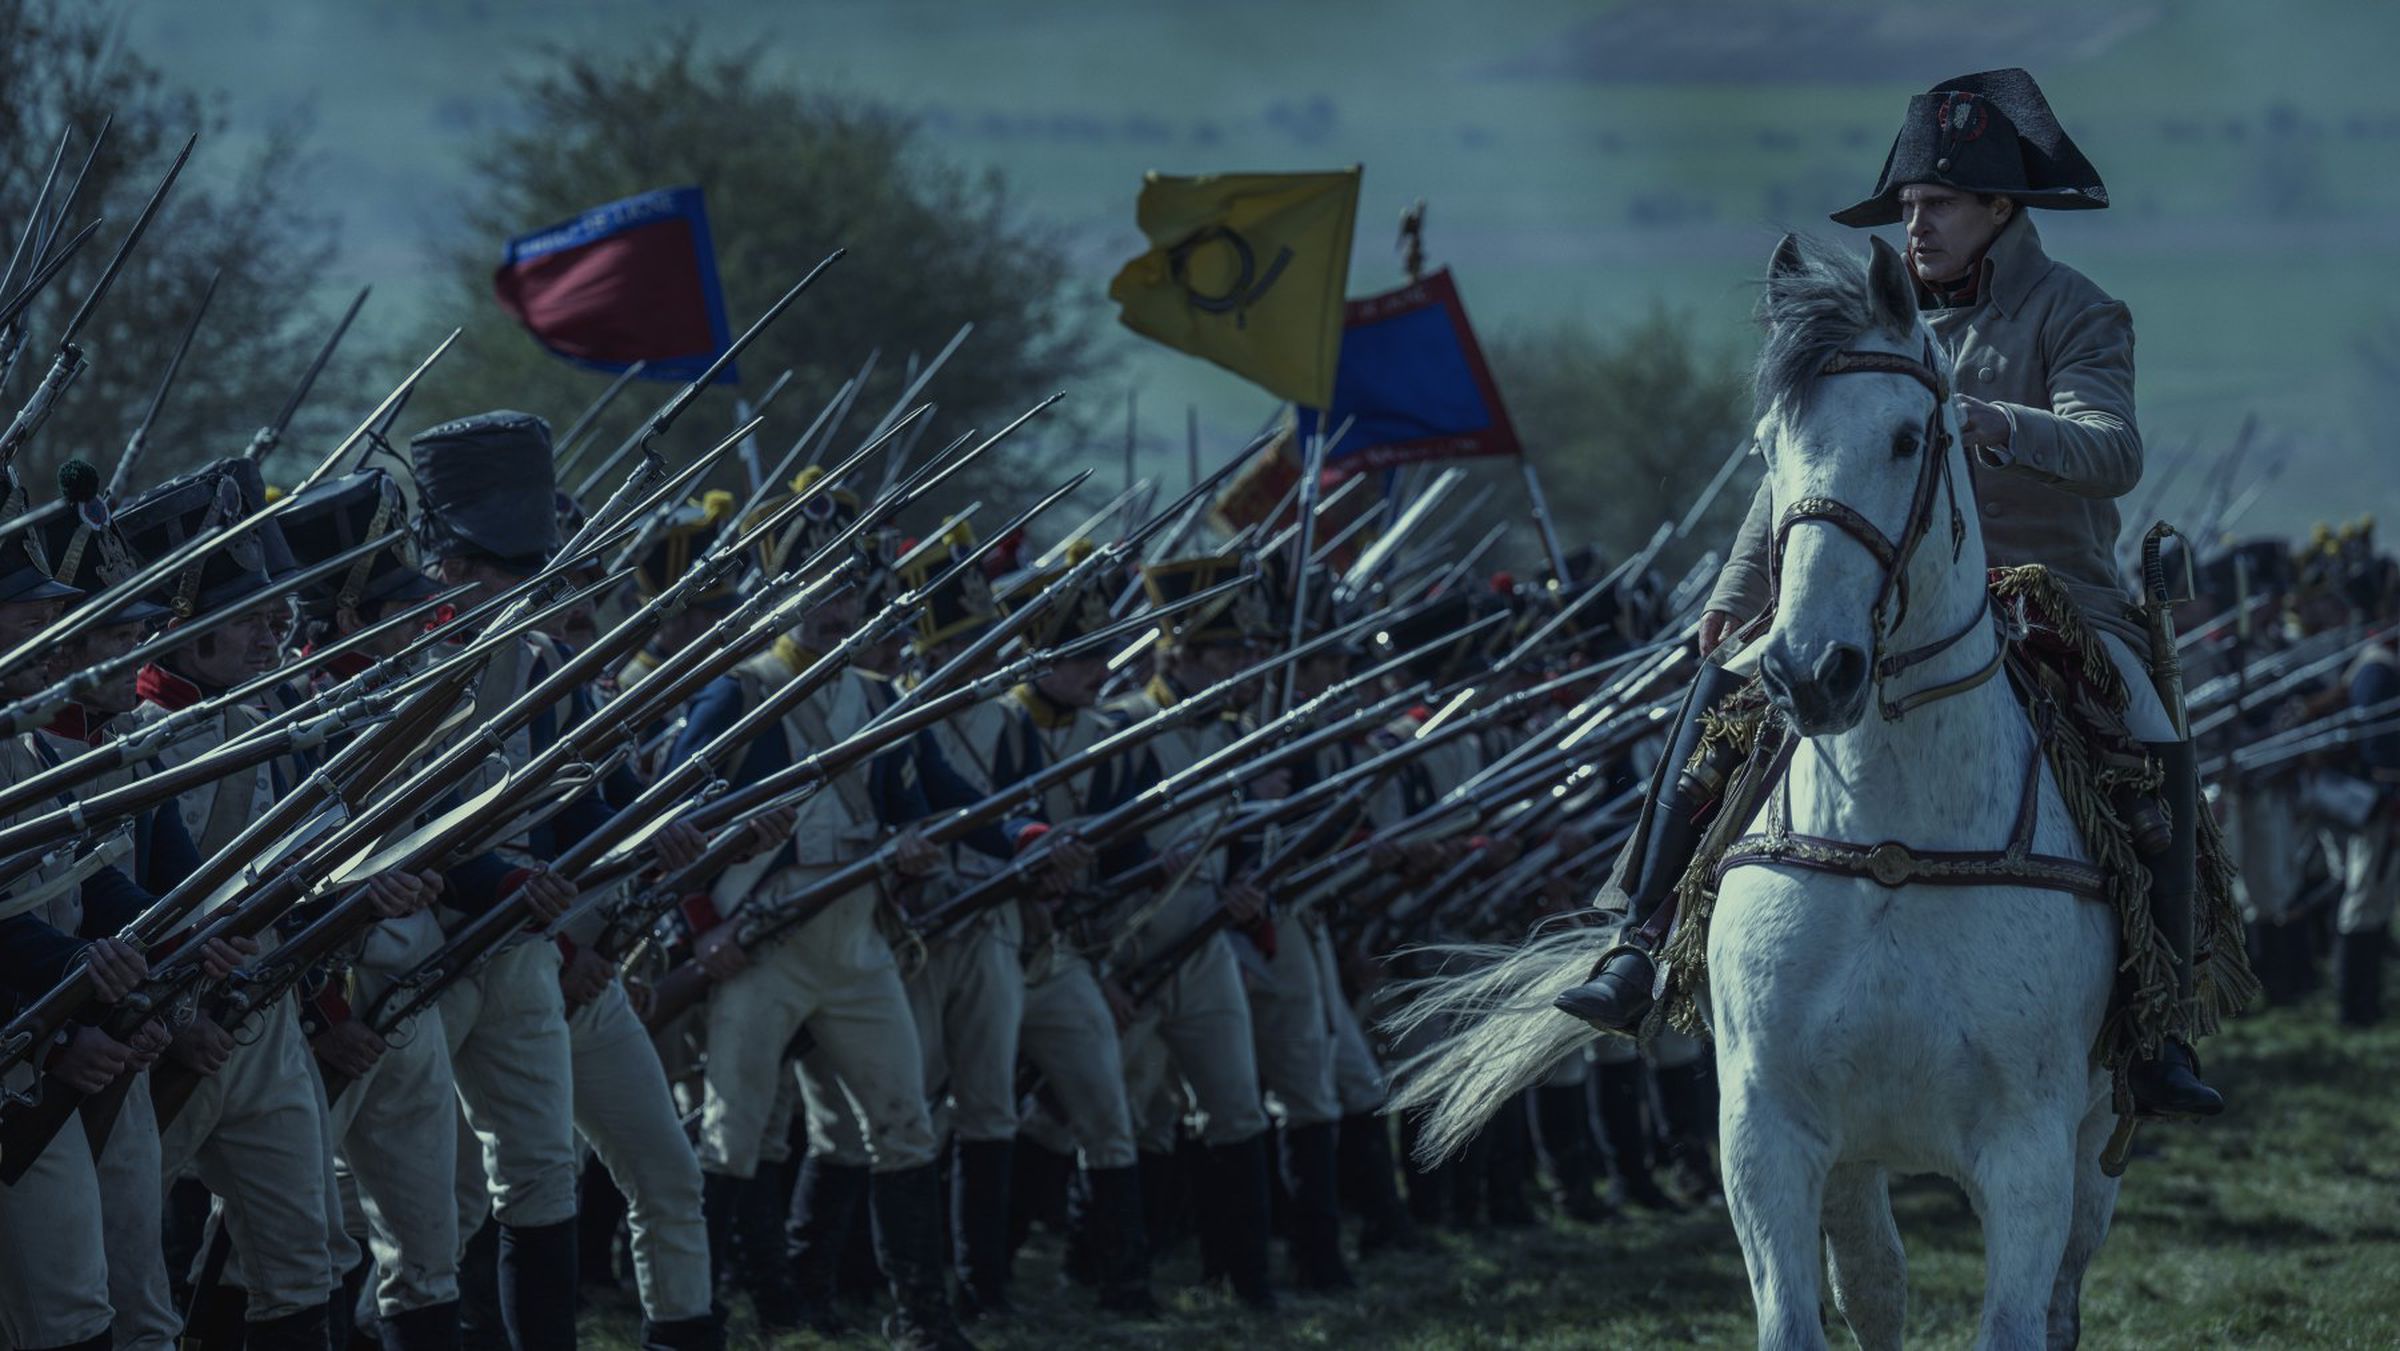 Still from the Apple TV Plus film Napoleon showing the cahracter on horseback in front of an army.